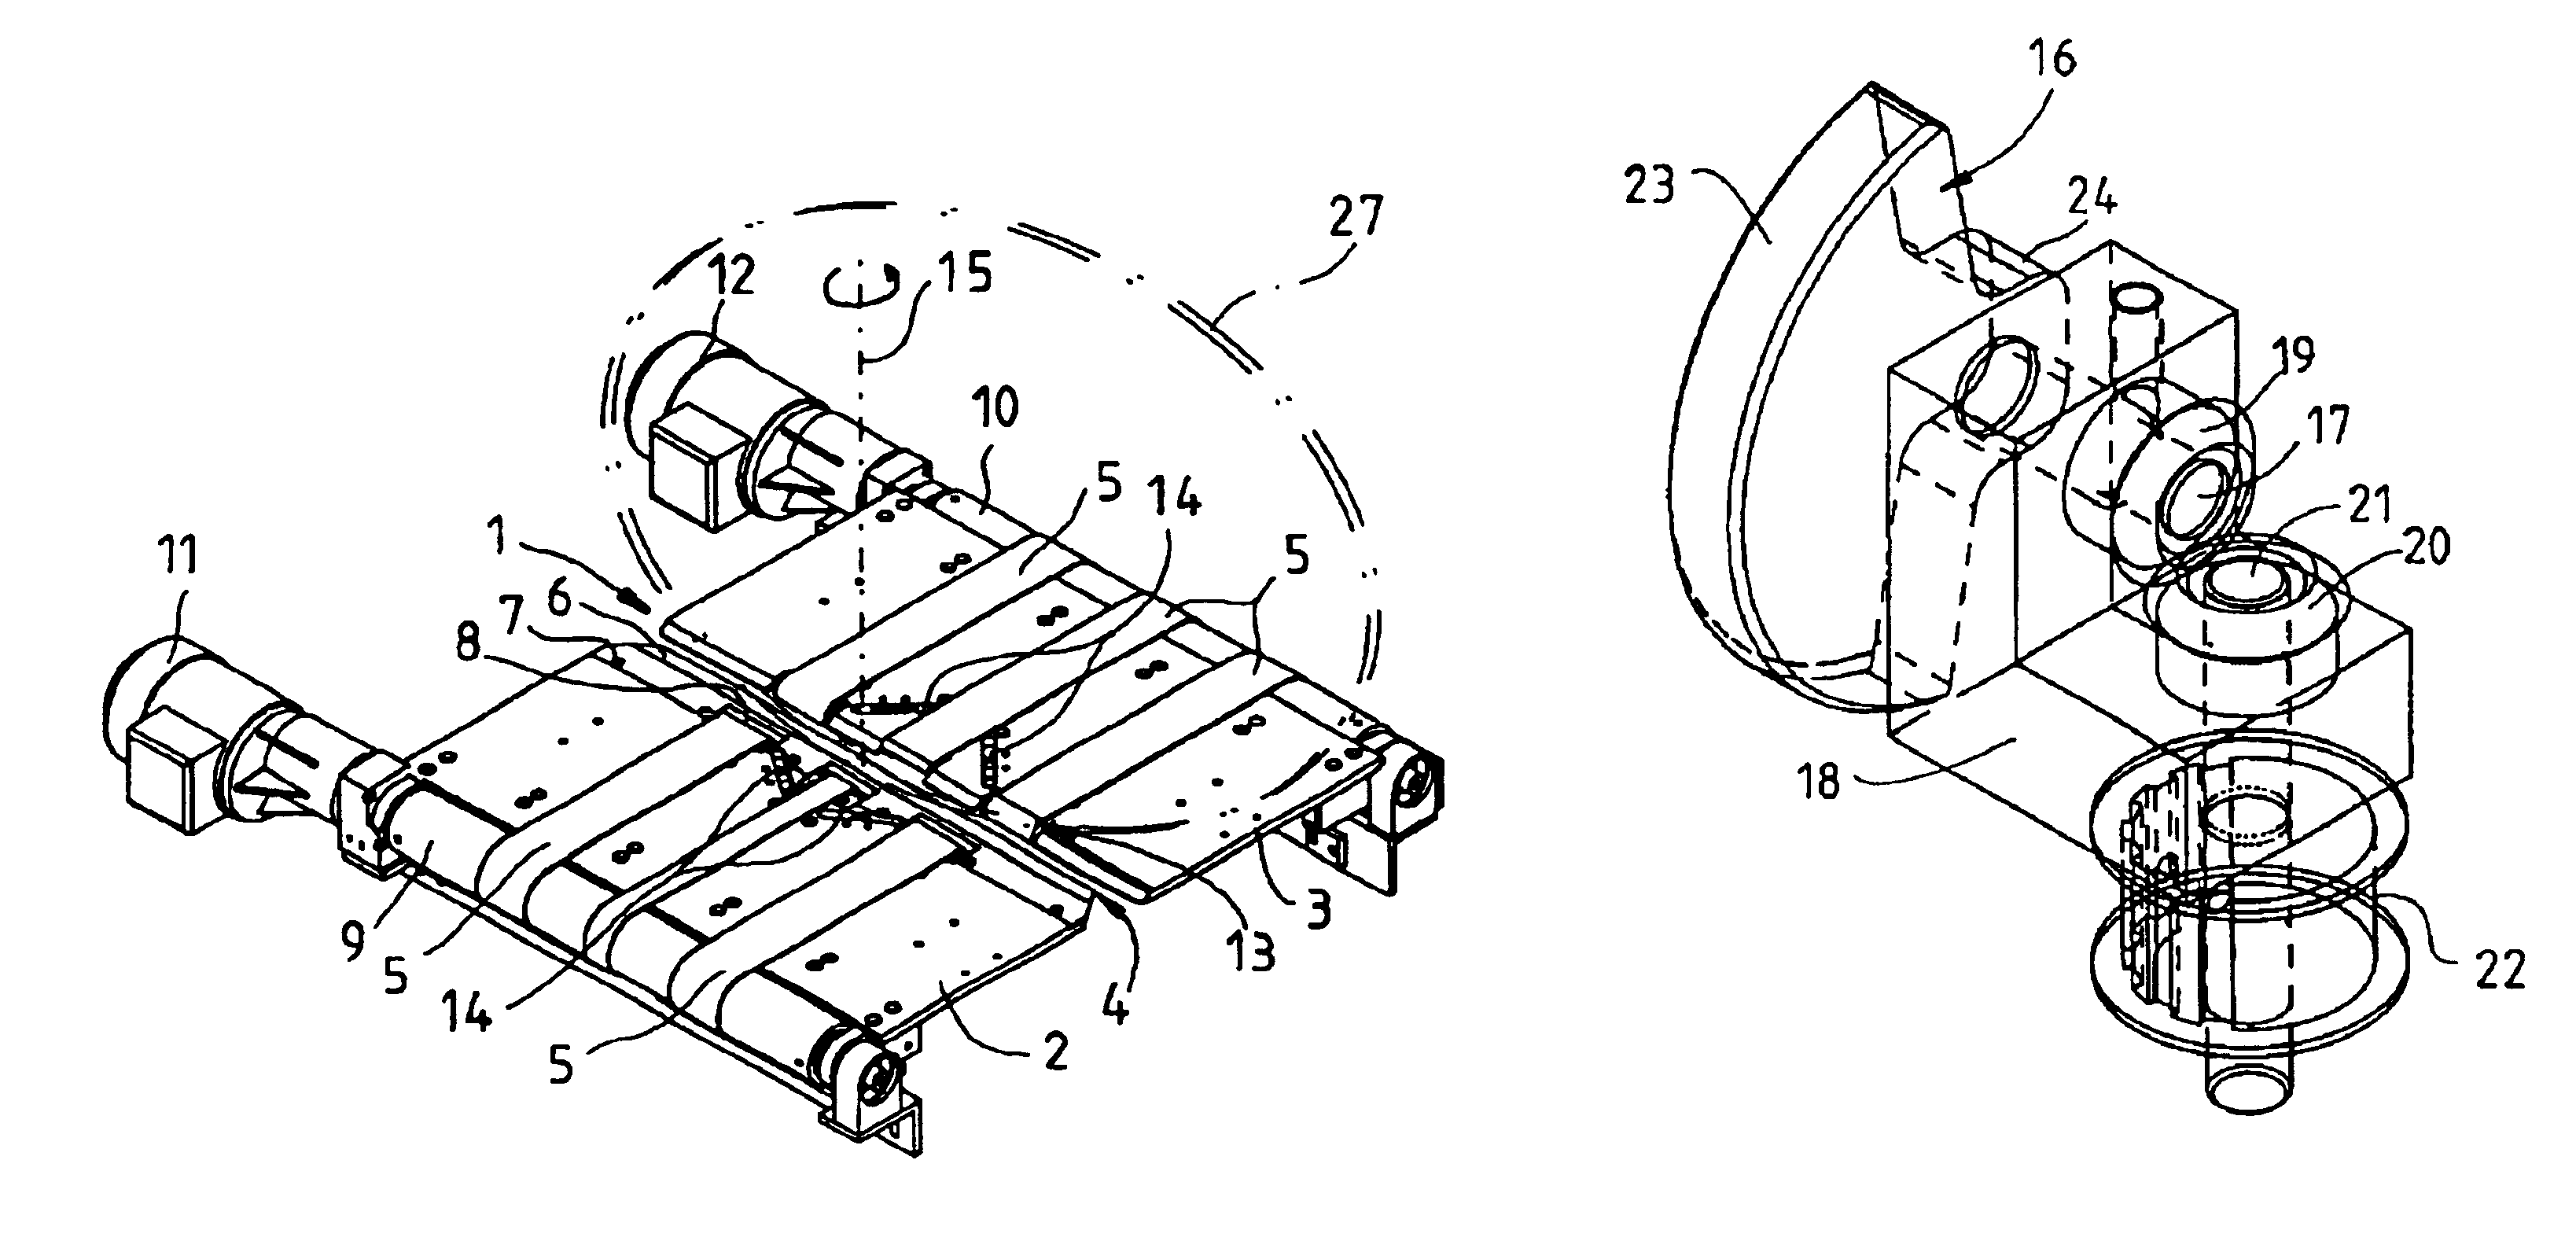 Rotating mechanism for conveyor systems